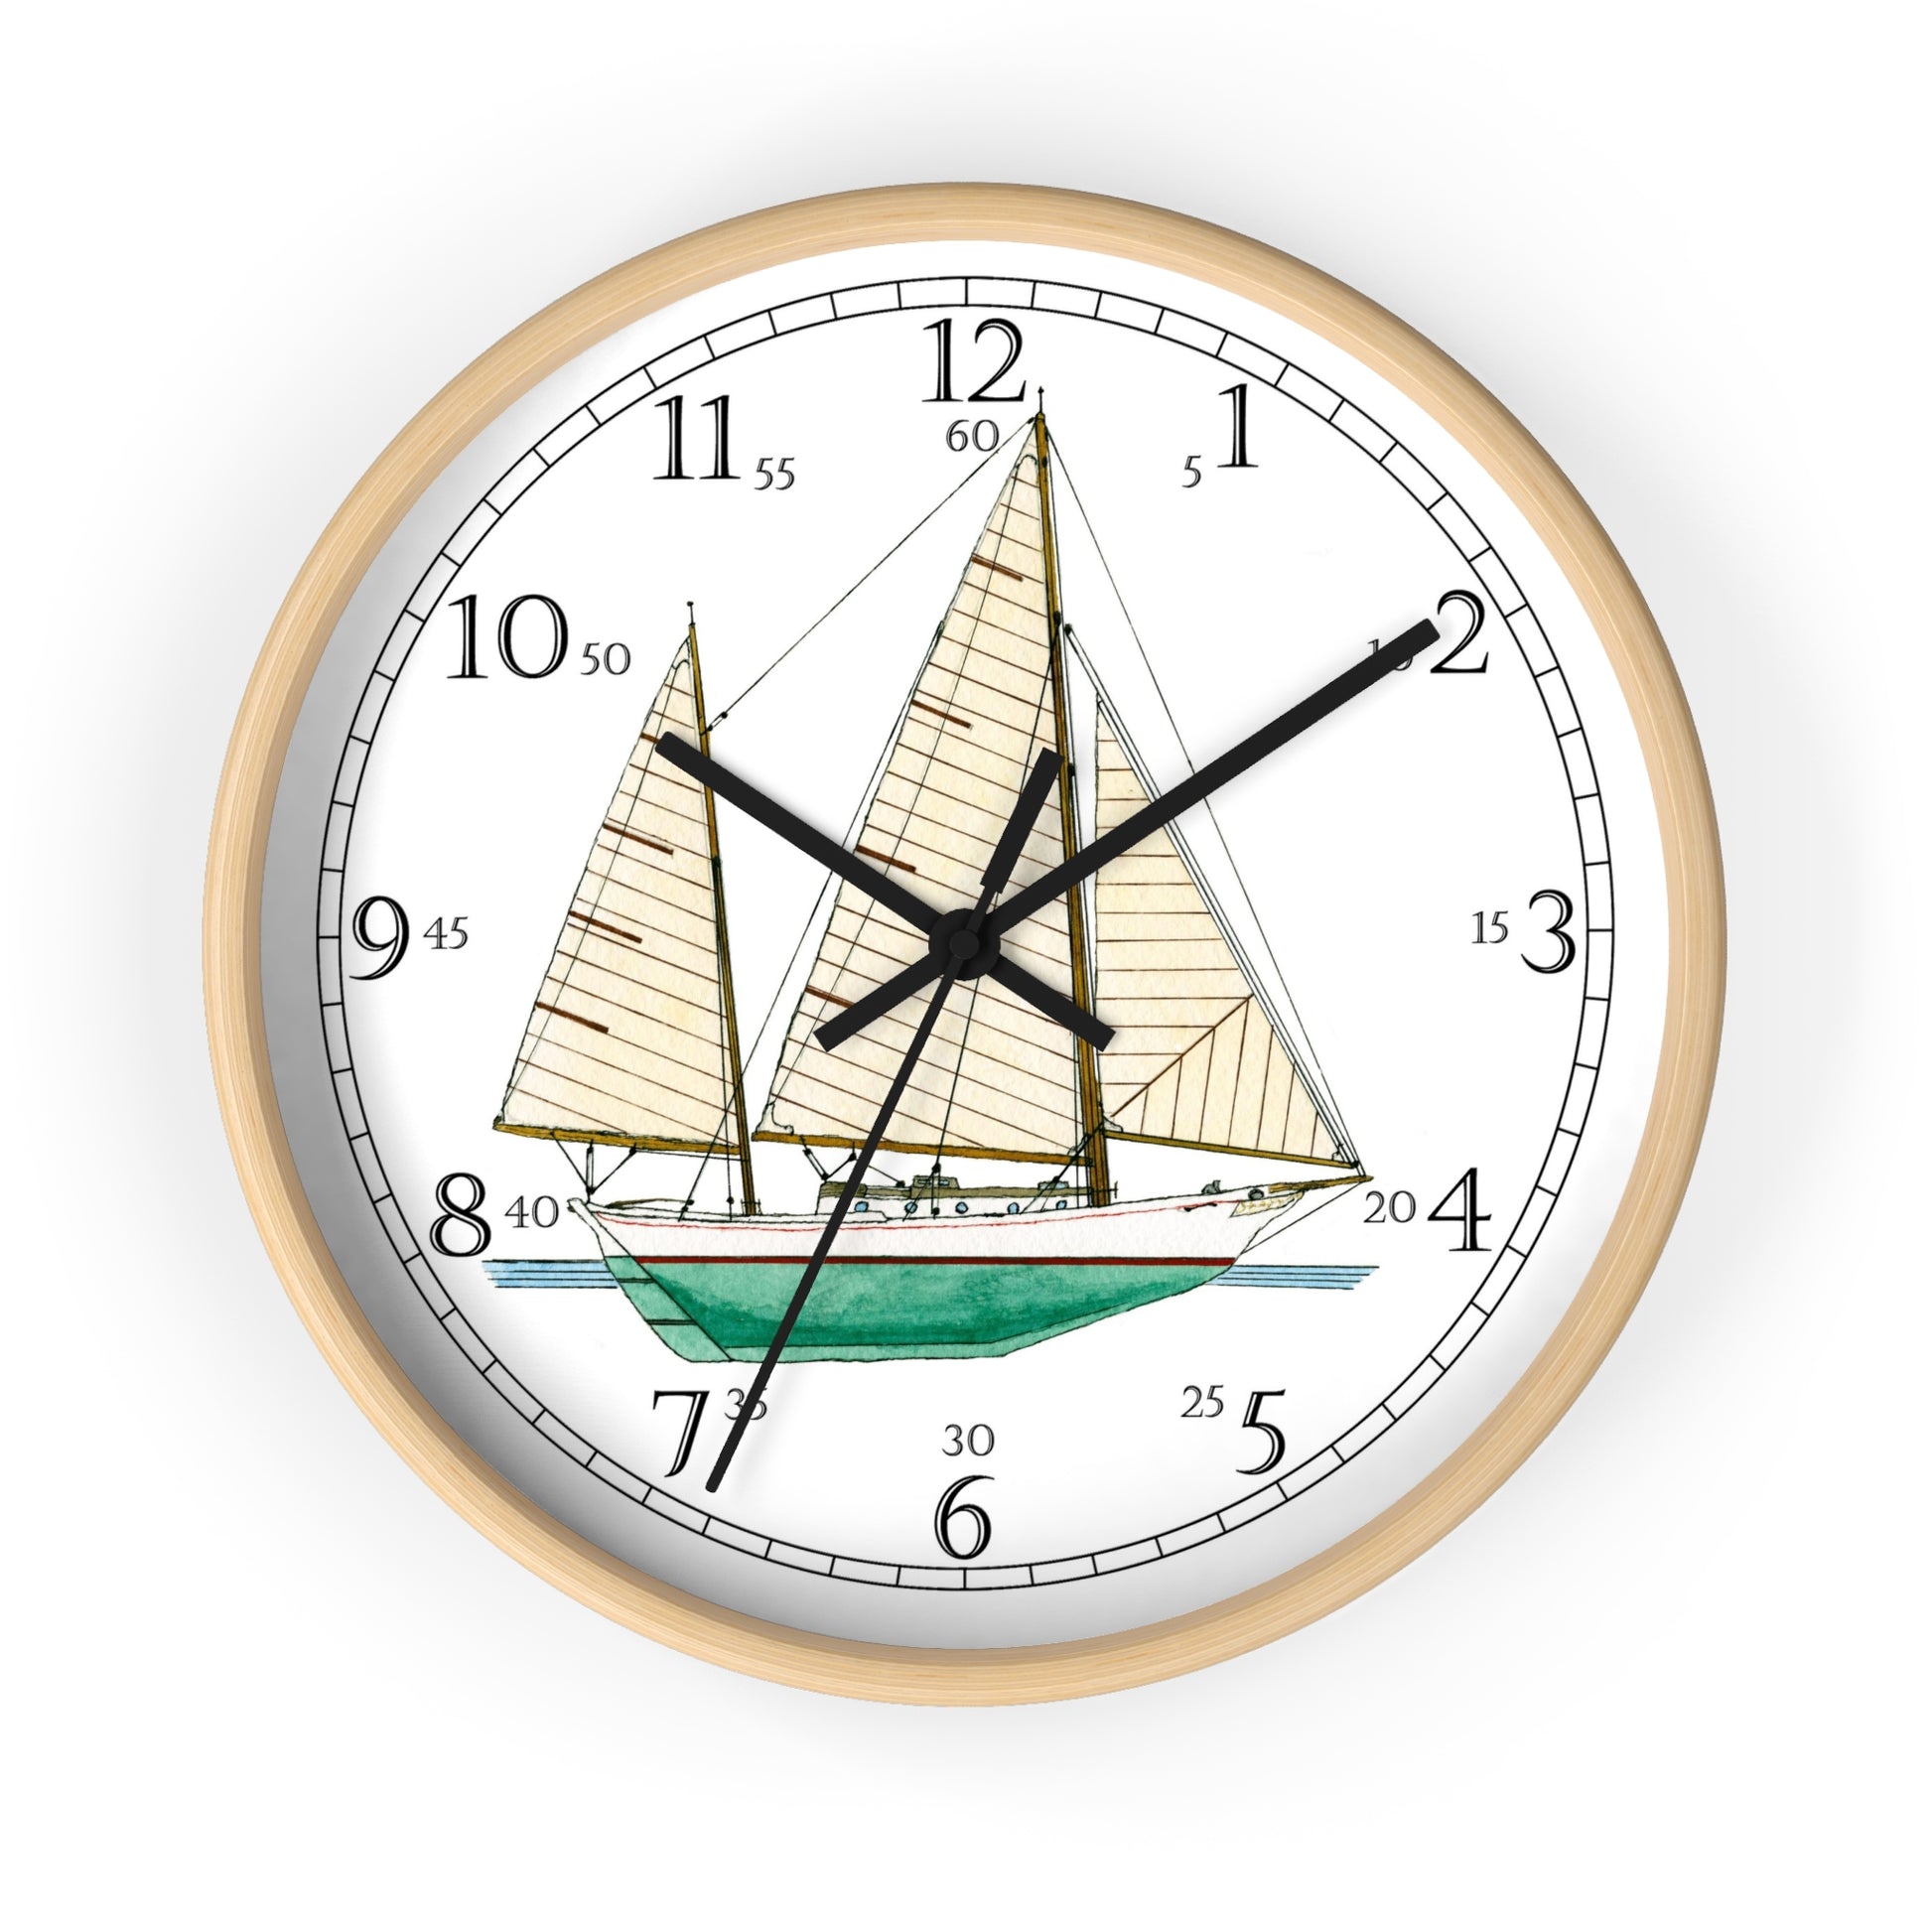 The Radiant Star cruising ketch has a flat transom, an outboard rudder and clipper bow. Sailing enthusiasts will enjoy using this clock on both land and sea. Great gift for your favorite sailor!  The boat design in the clock is a reproduction of an original watercolor by Lee M. Buchanan.